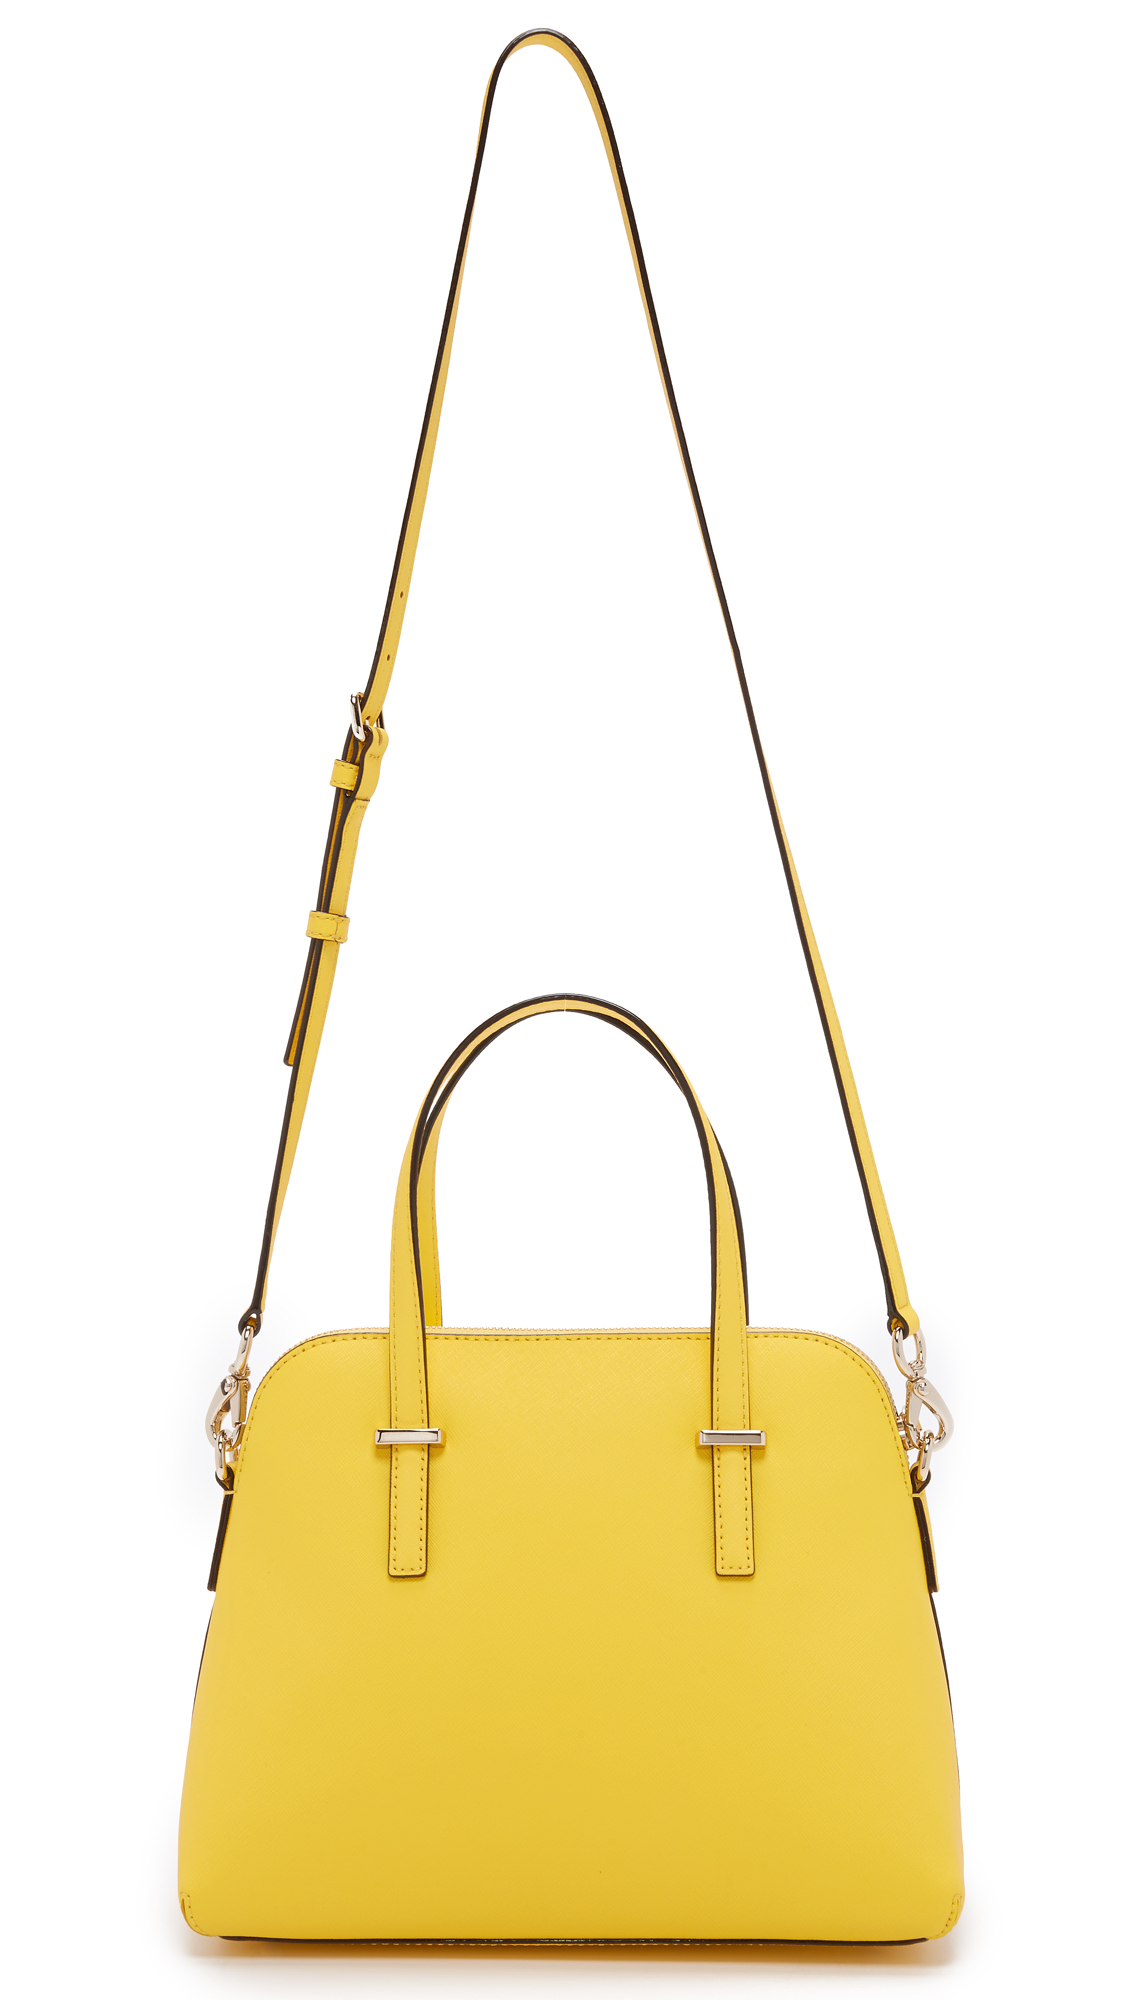 Kate Spade Maise Bag in Yellow - Lyst